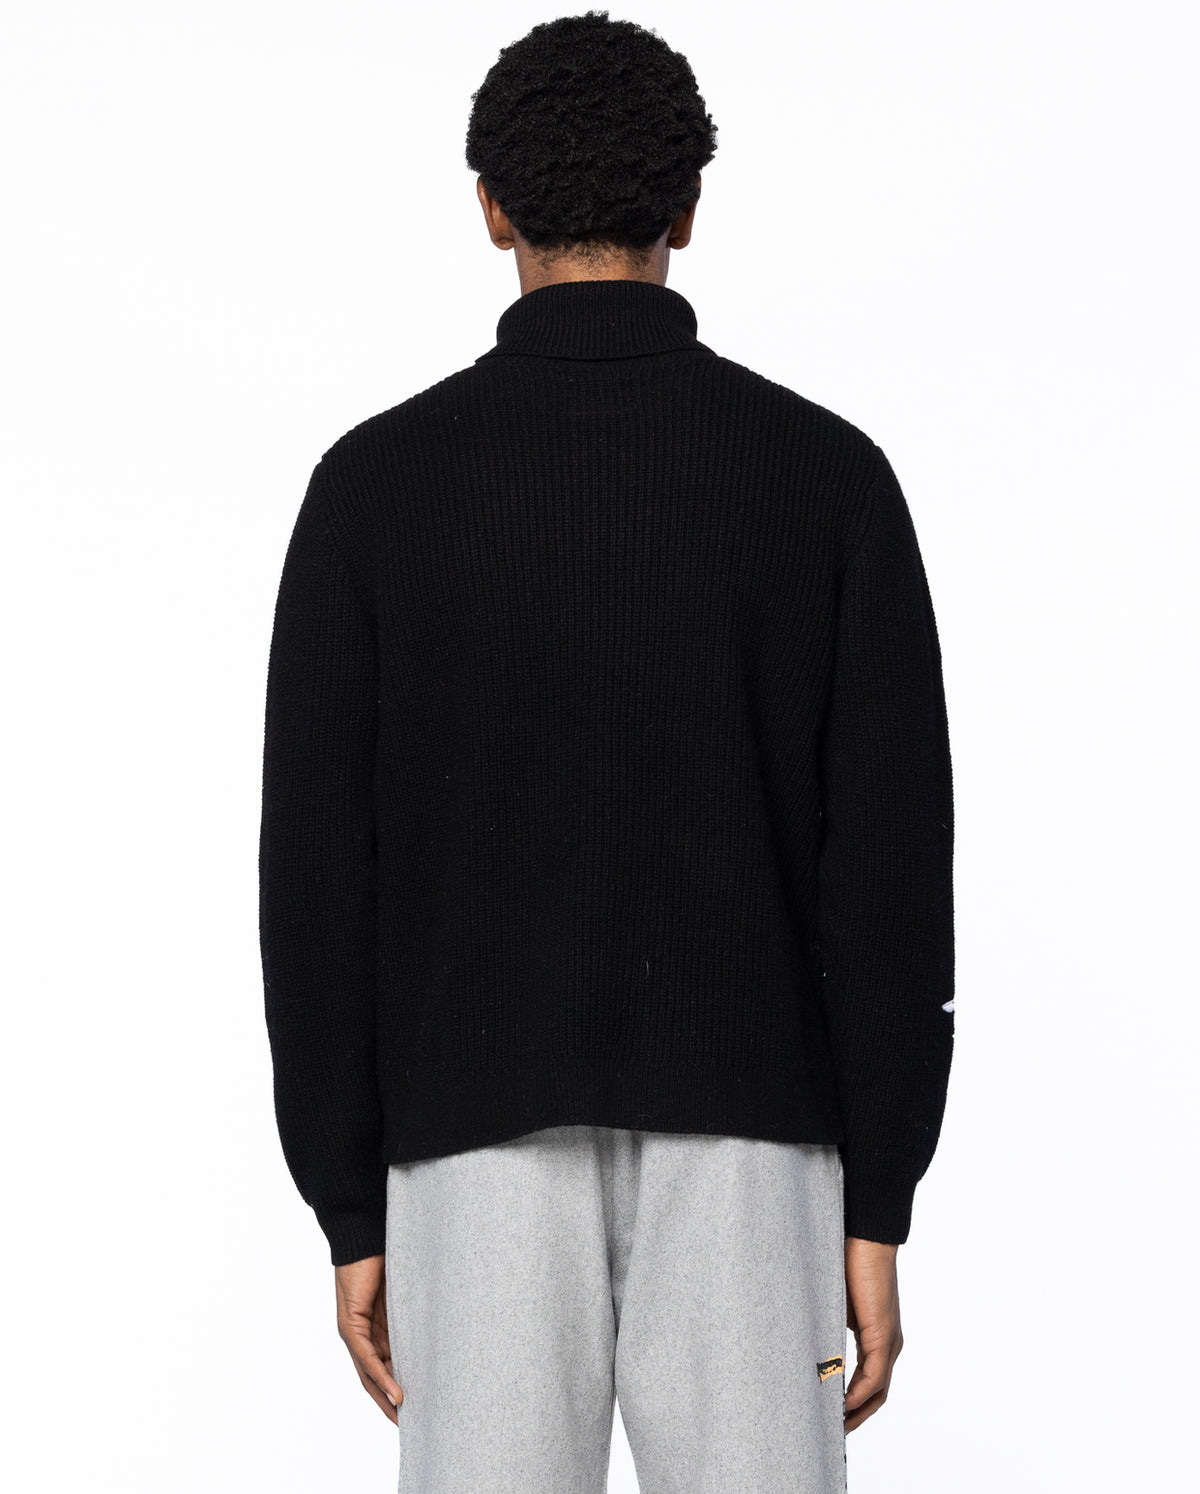 Ribbed Turtleneck Sweater With Embroidery - Black